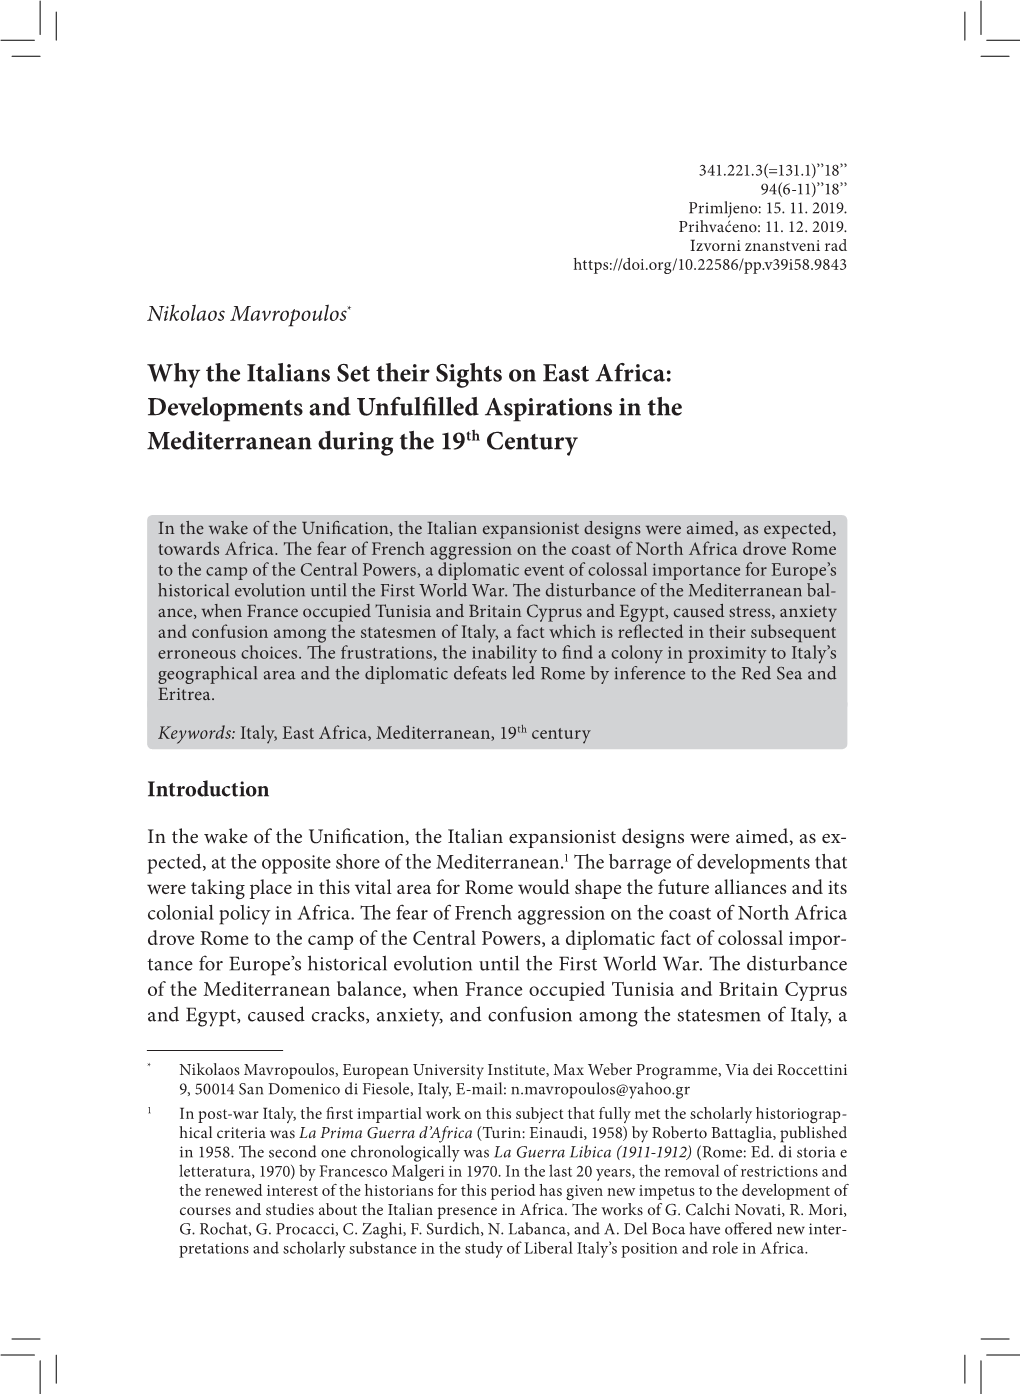 Why the Italians Set Their Sights on East Africa: Developments and Unfulfilled Aspirations in the Mediterranean During the 19Th Century